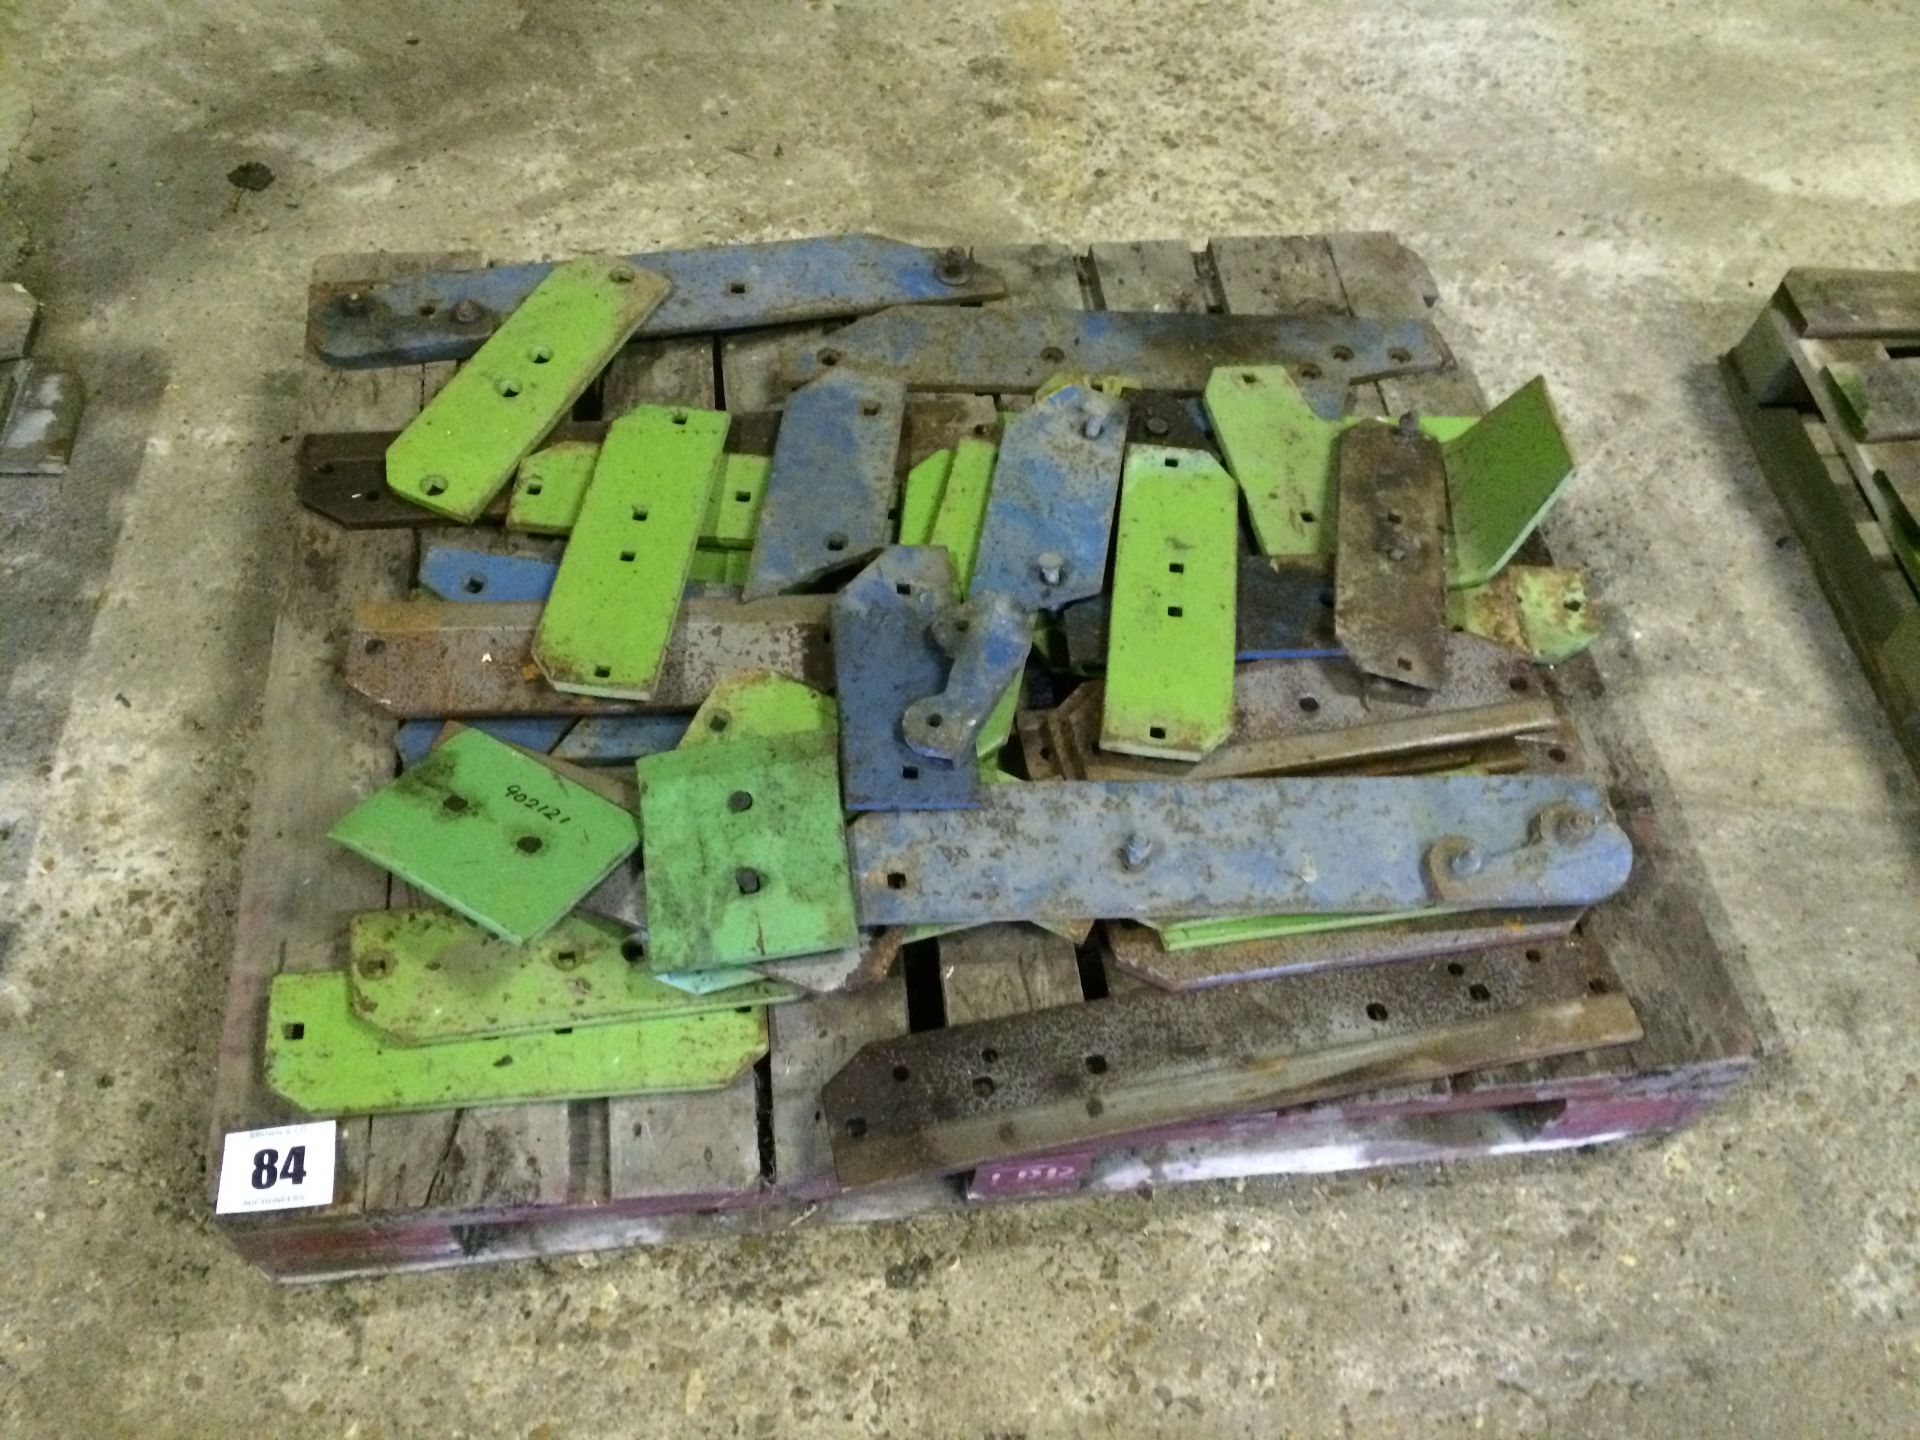 Dowdeswell/Ransomes plough parts